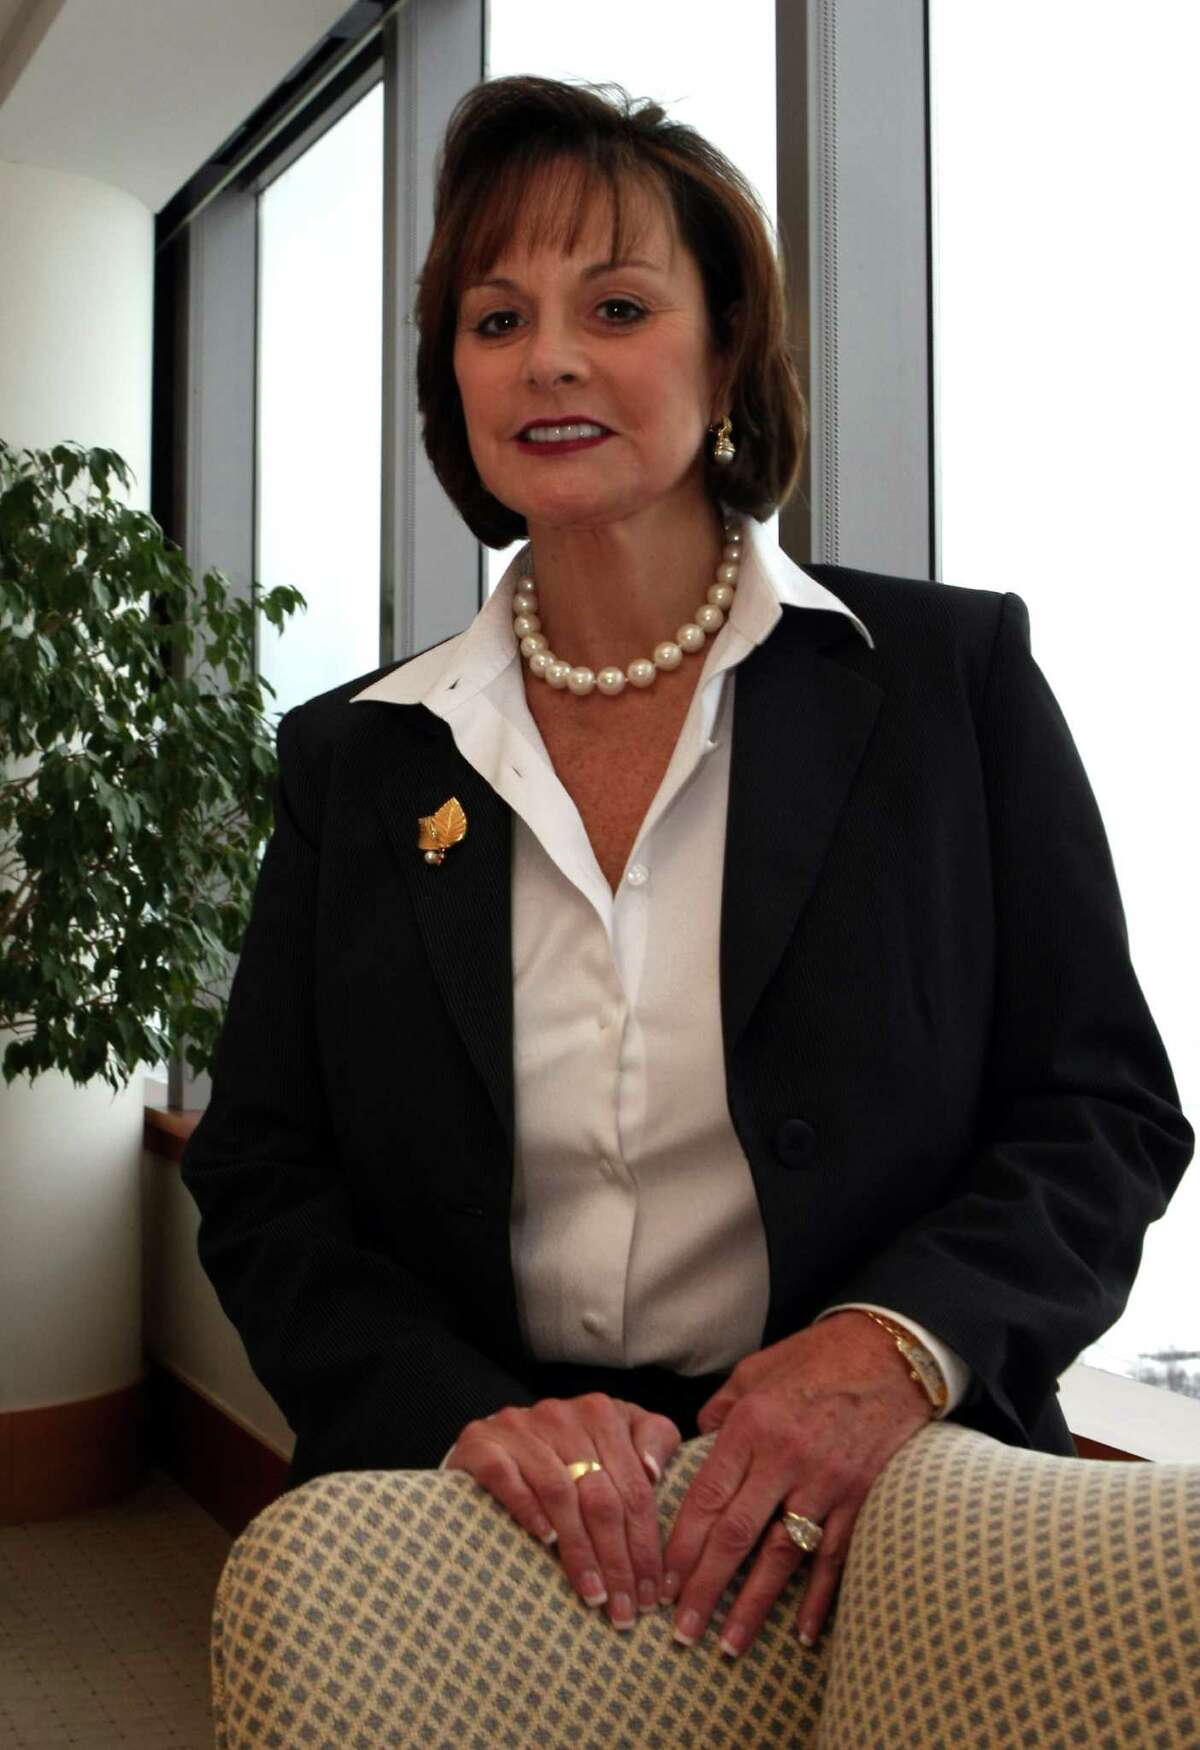 Patricia Hemingway Hall, CEO of HCSC, was the sixth-highest-compensated insurance executive in the U.S. in 2014, a survey shows.